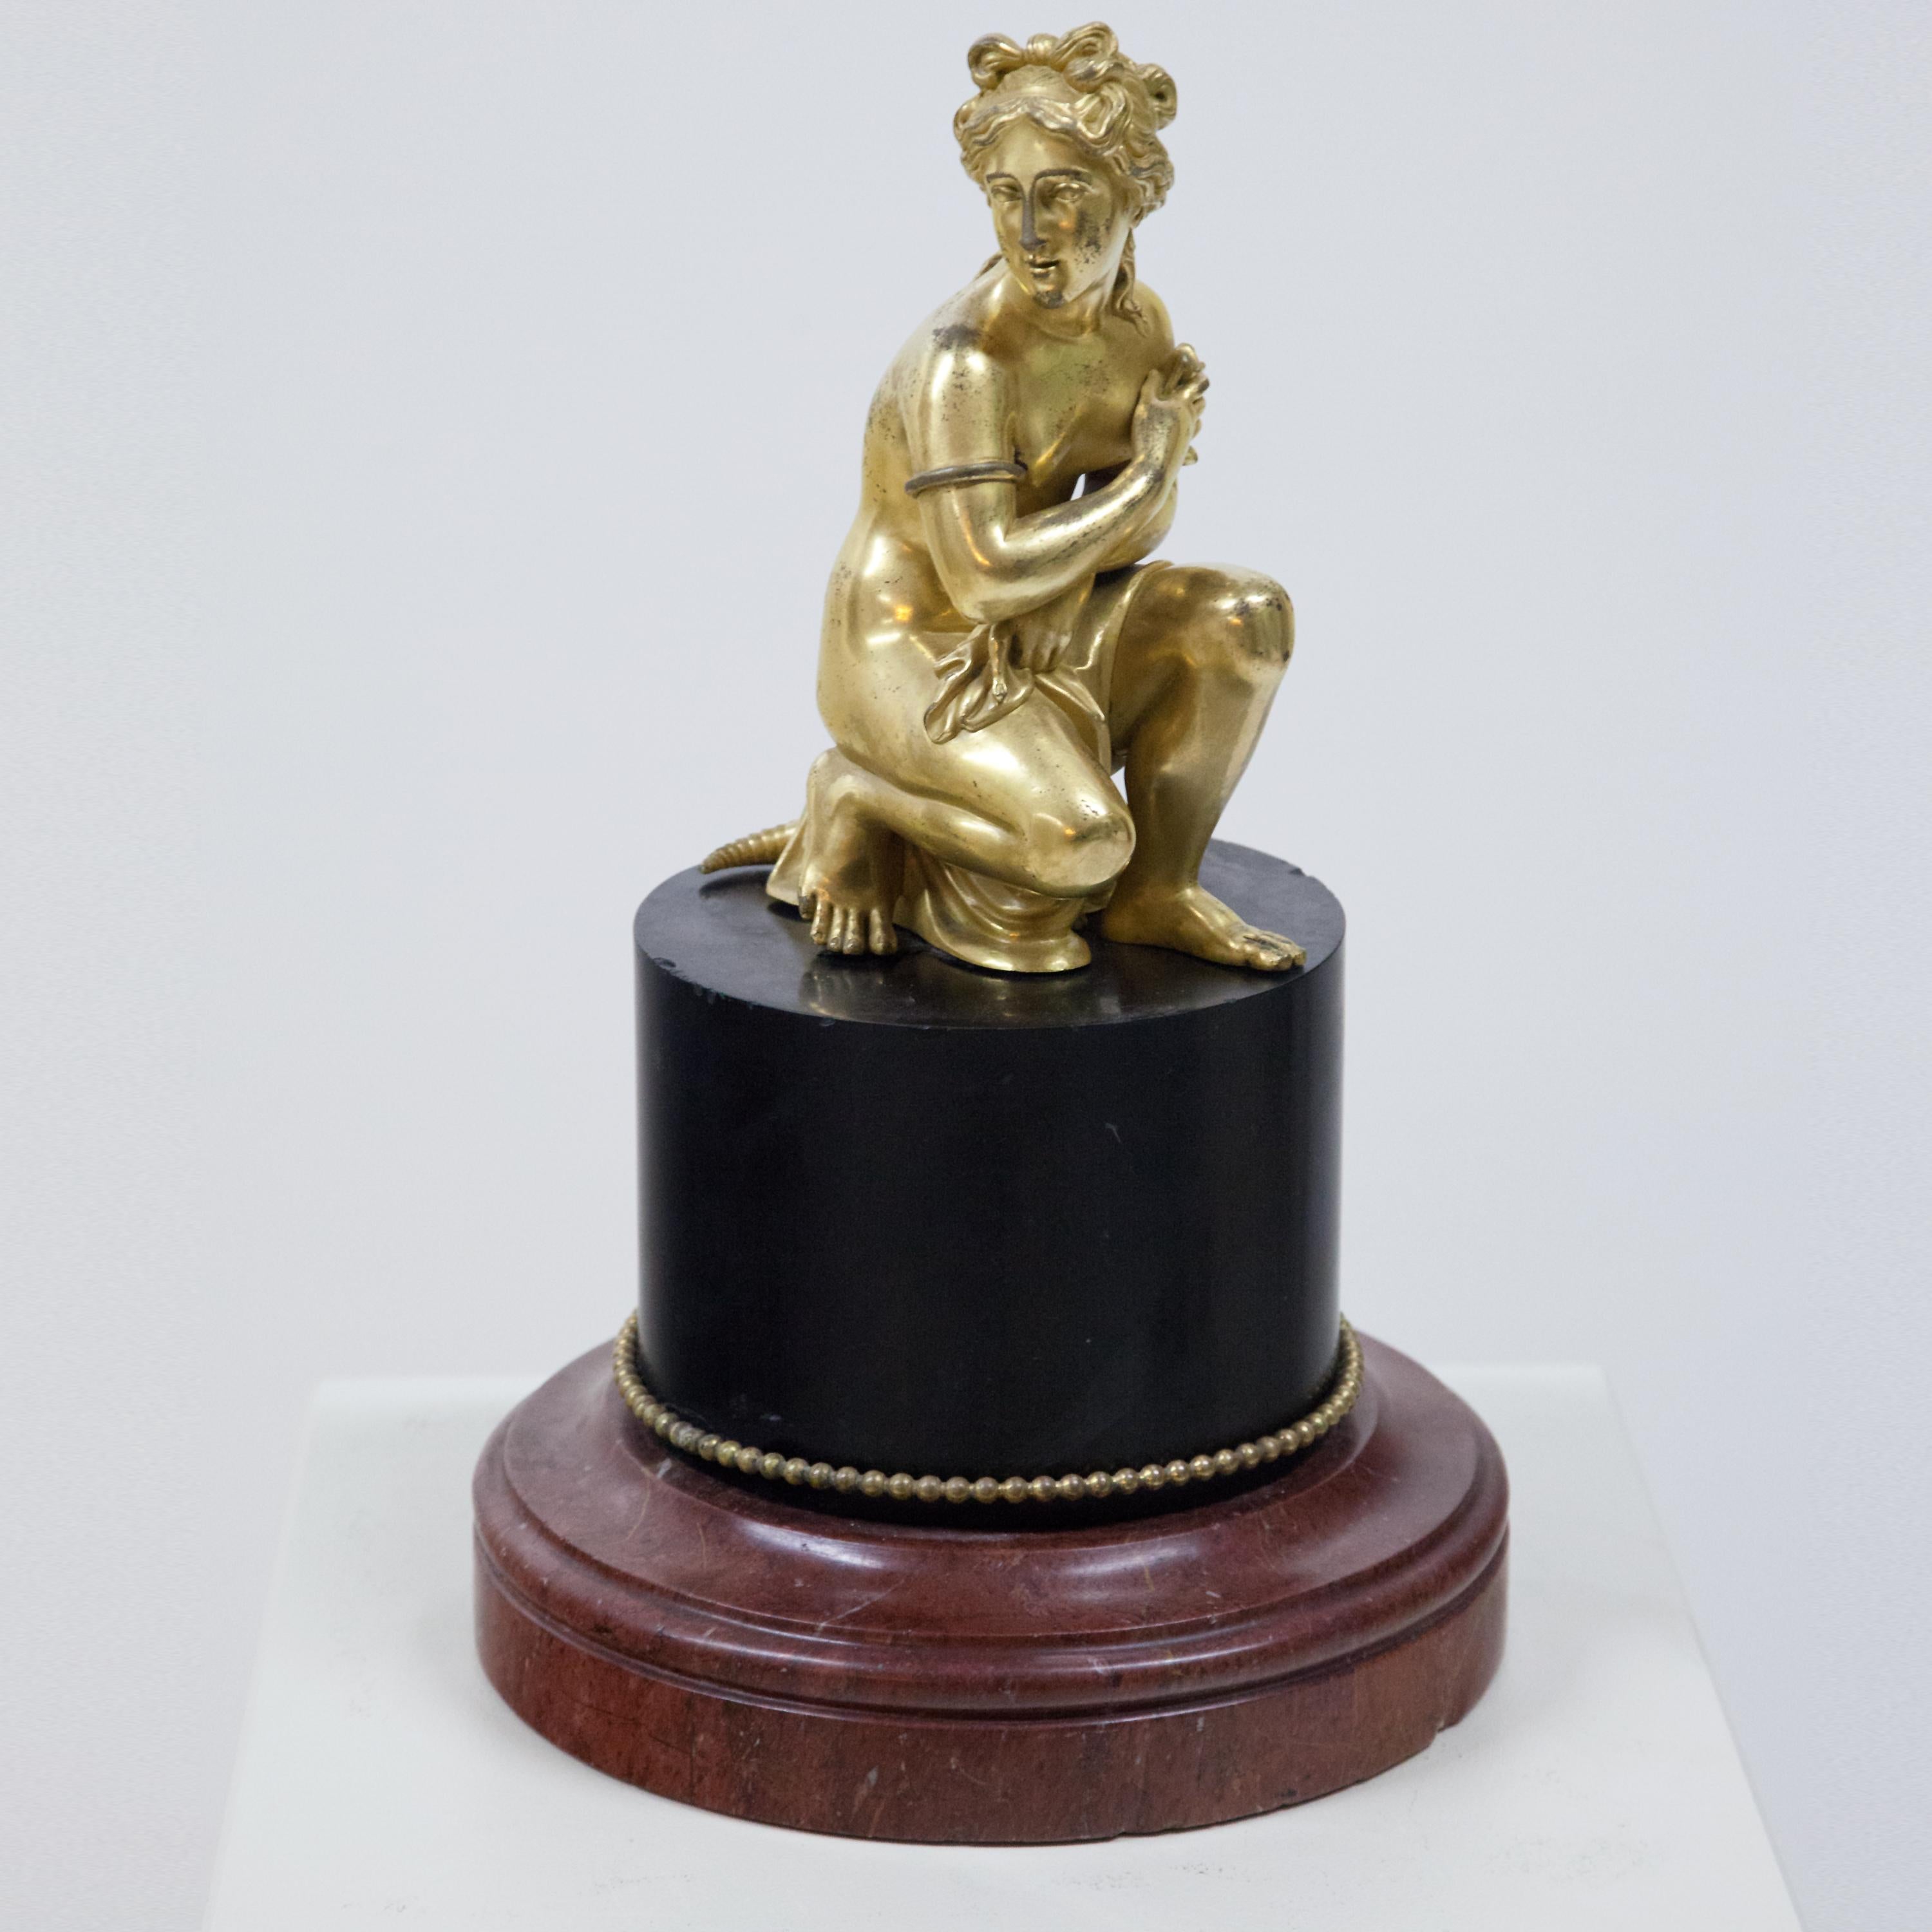 Representation of the sitting Venus with turtle after the original by Antoine Coysevox (1640-1720, Louvre 1686) on a round black truncated column with red profiled base. Marble, bronze fire-gilt. (Measures: Height plinth 19 cm).